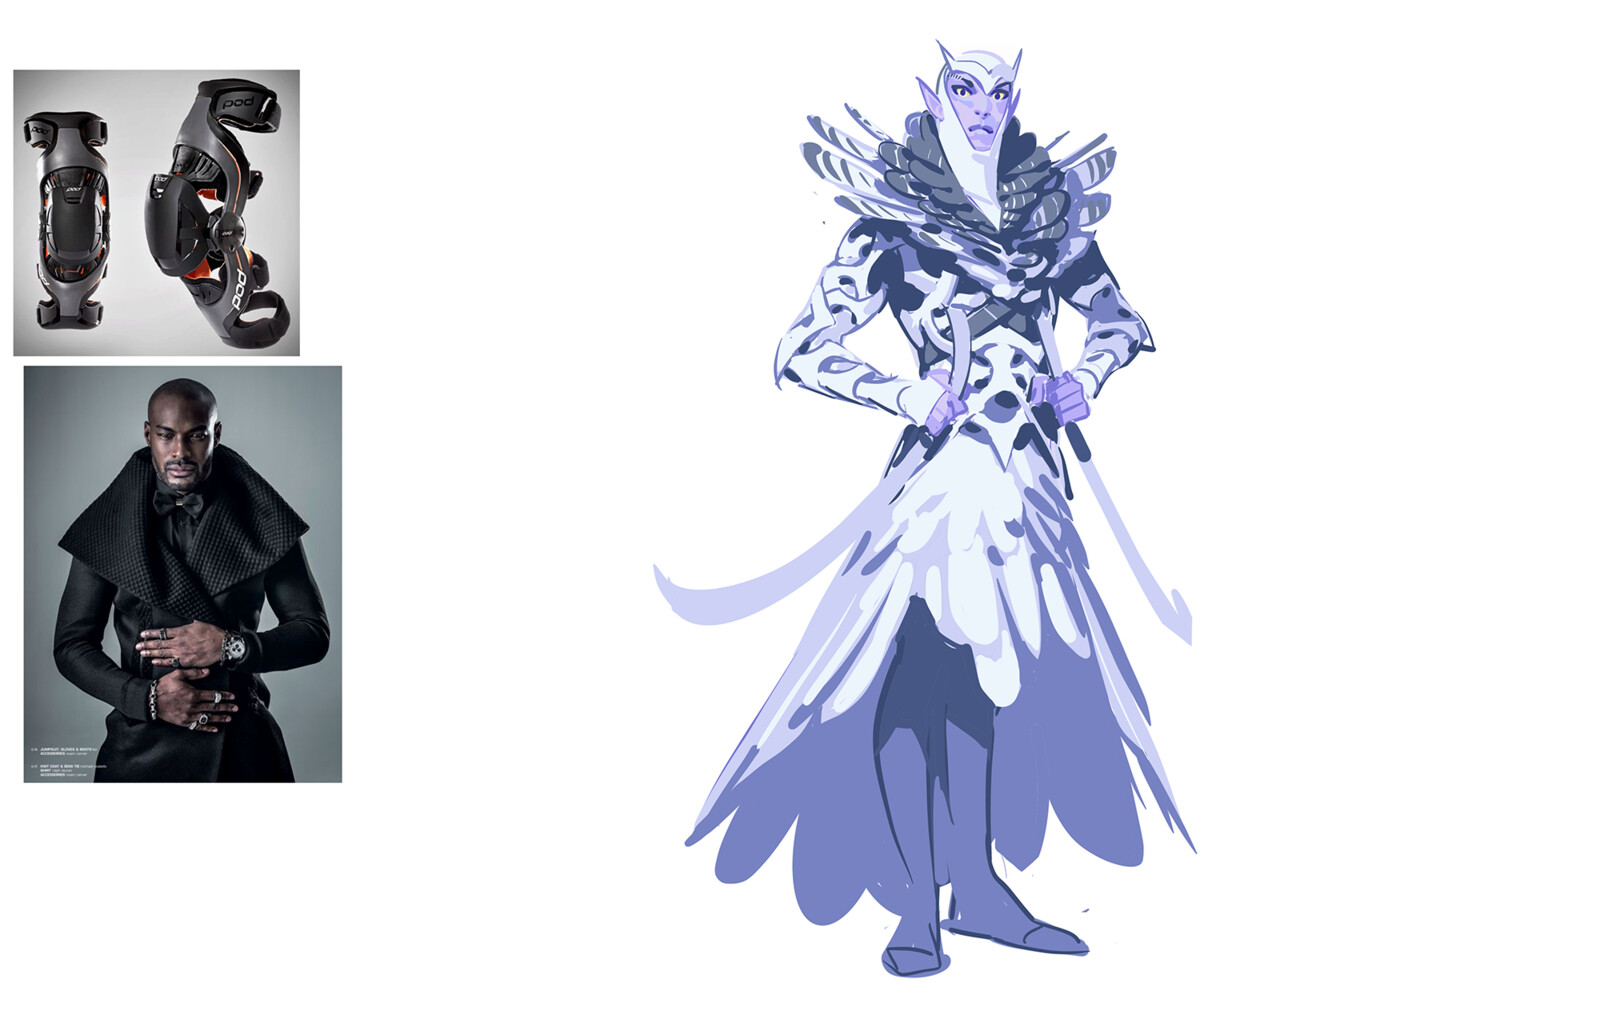 WINTER - ELF - KNIGHT
Initially wanted to take that ref and go "fur" but after giving him the hood I thought "snowy owl" could be pretty cool.